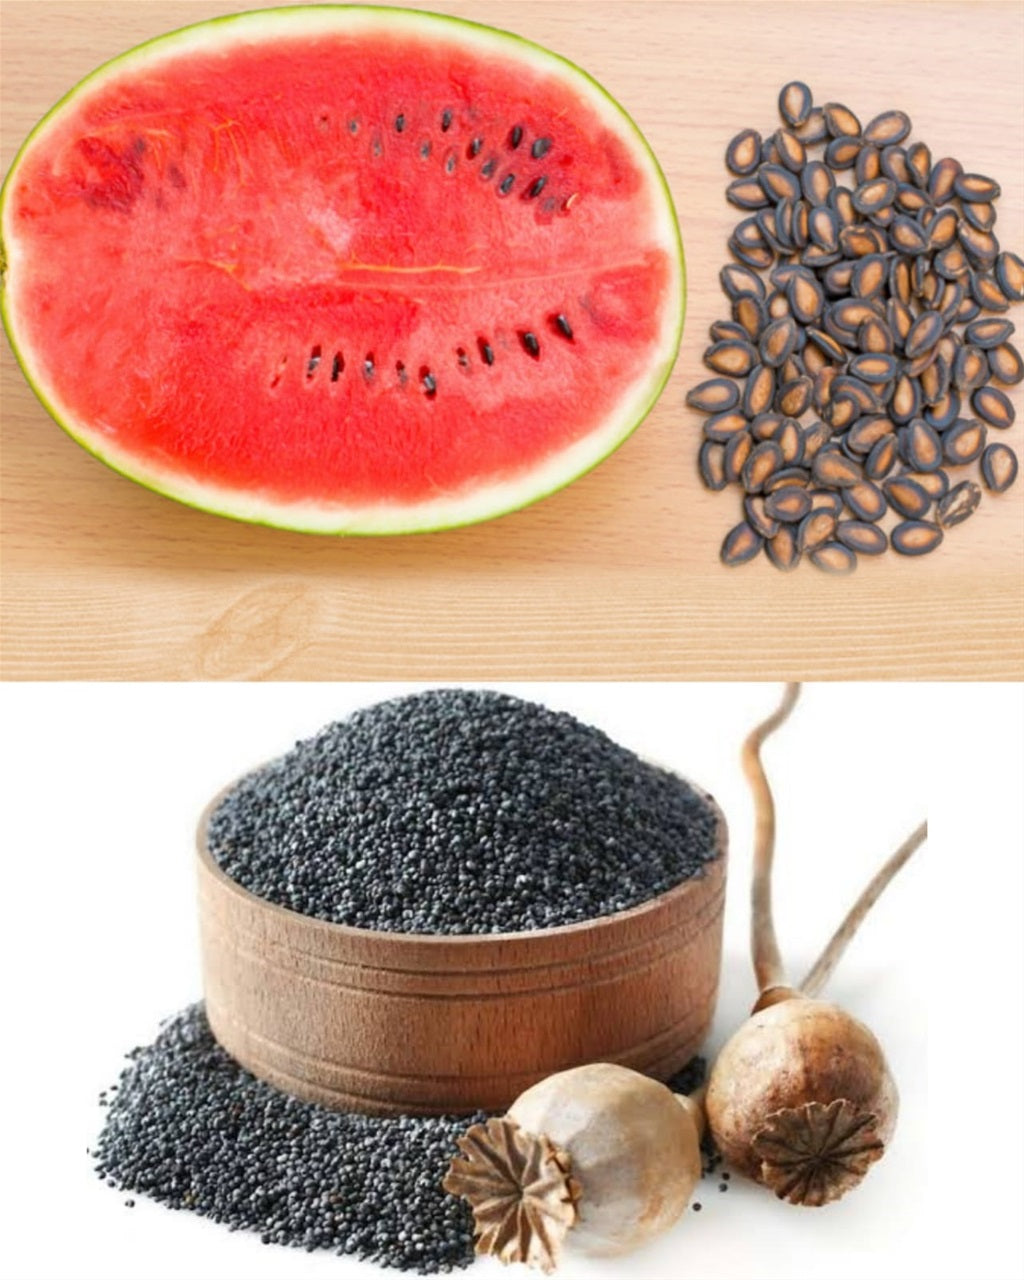 WATERMELON SEEDS AND POPPY SEEDS | 7. Aug, 2022